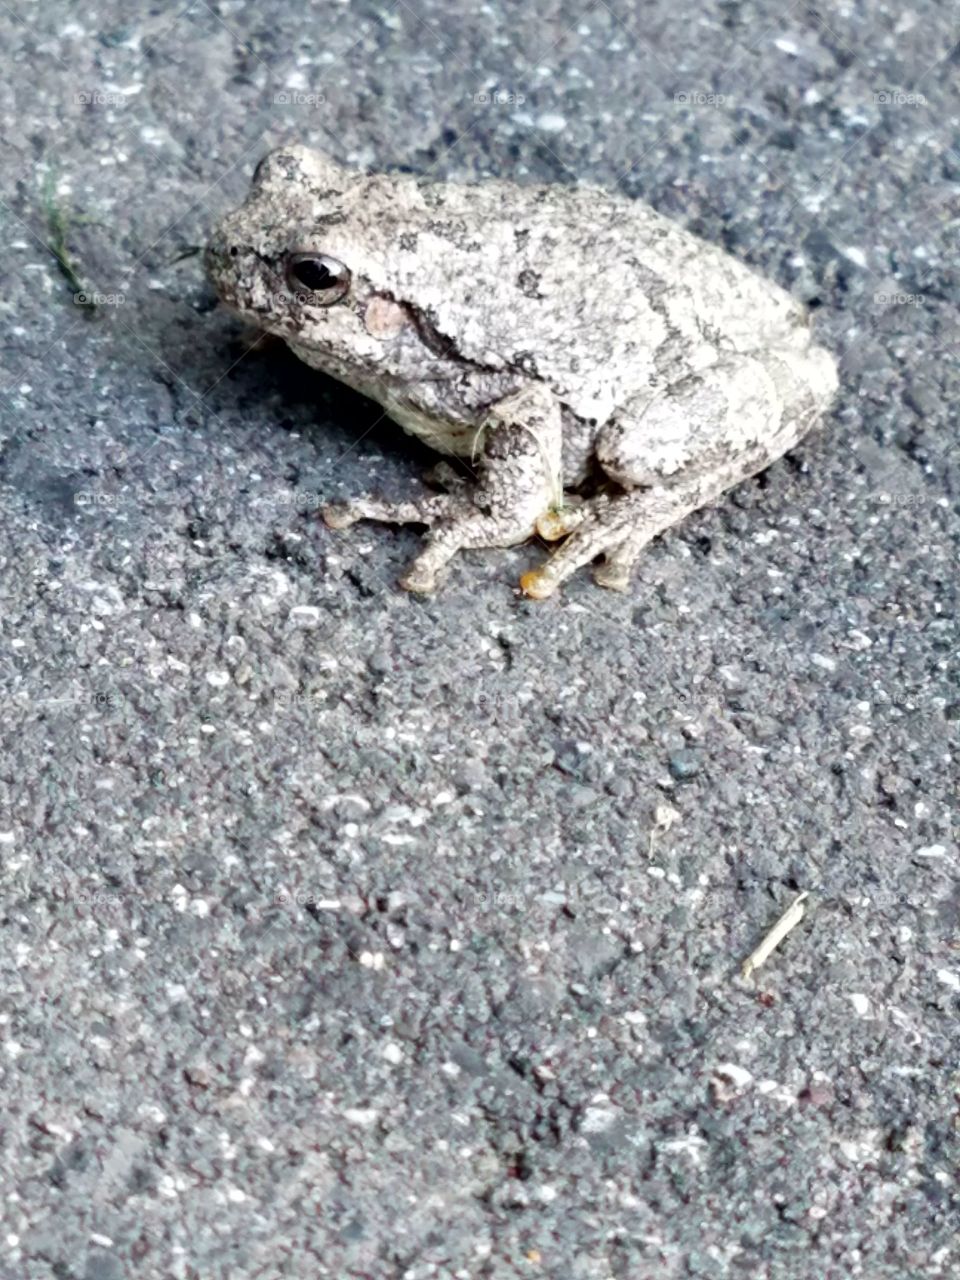 toad trying to camoflauge itself